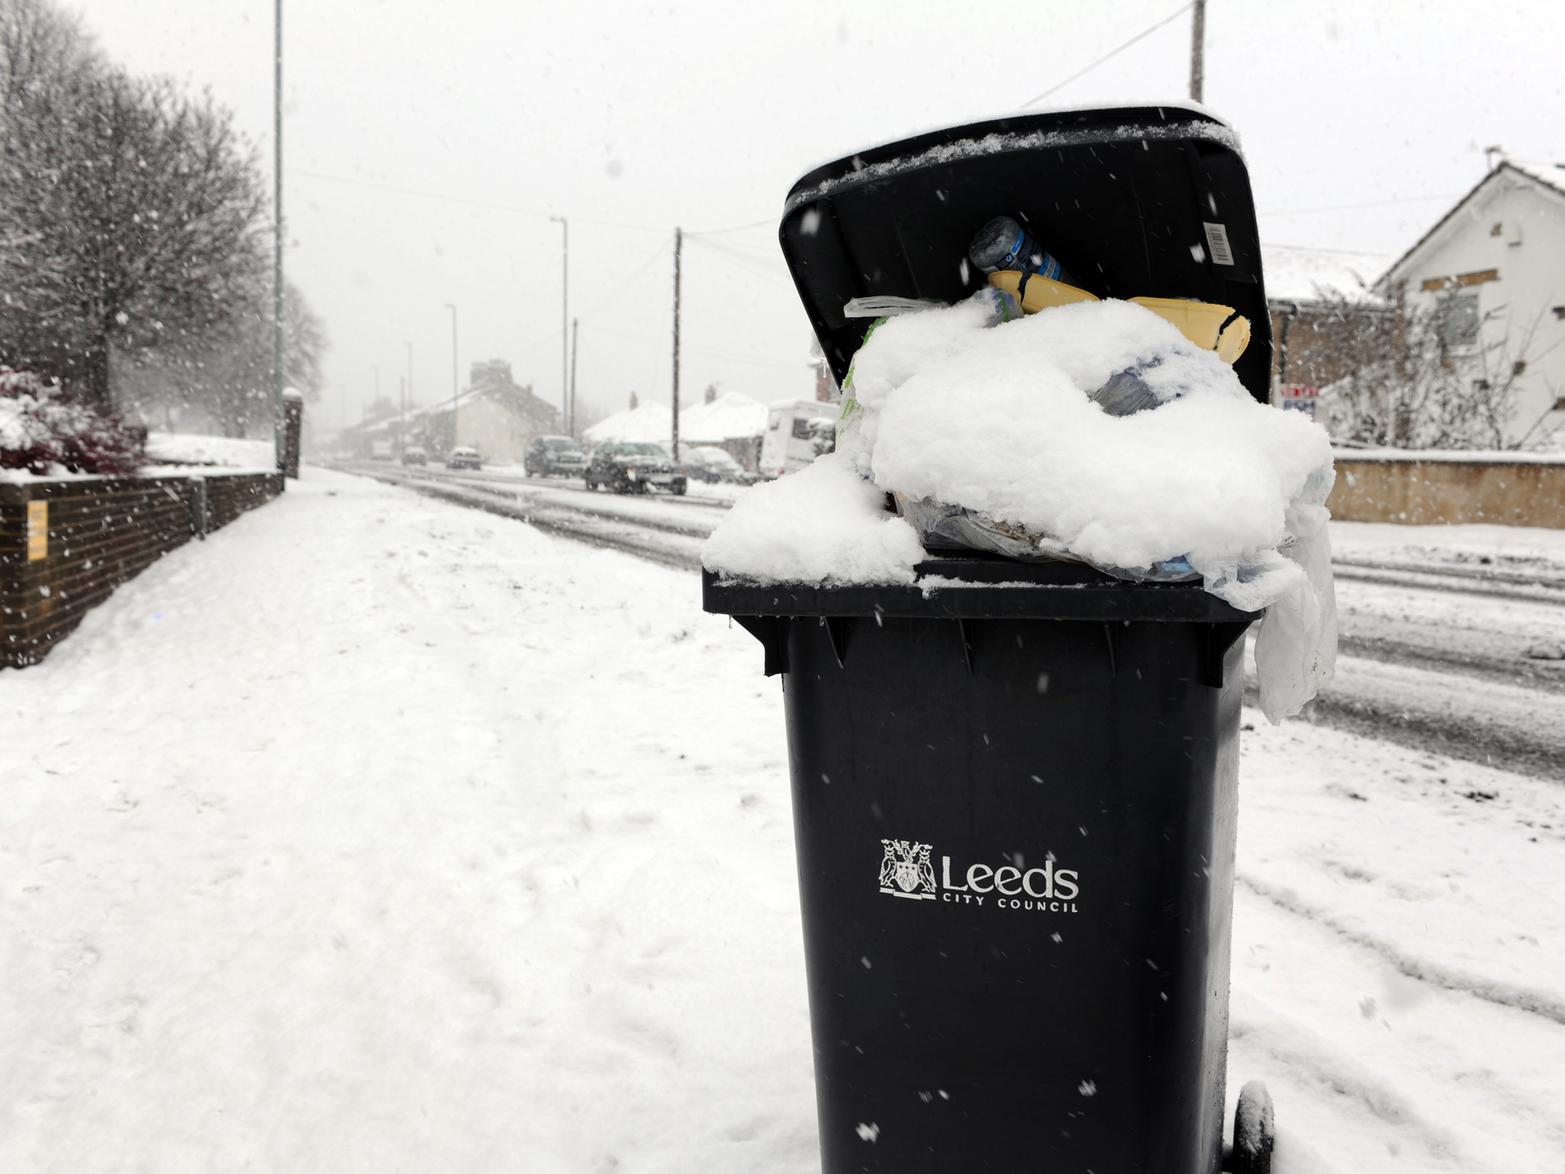 The snow was so thick in Leeds that bins were left uncollected, like this one in Pudsey.